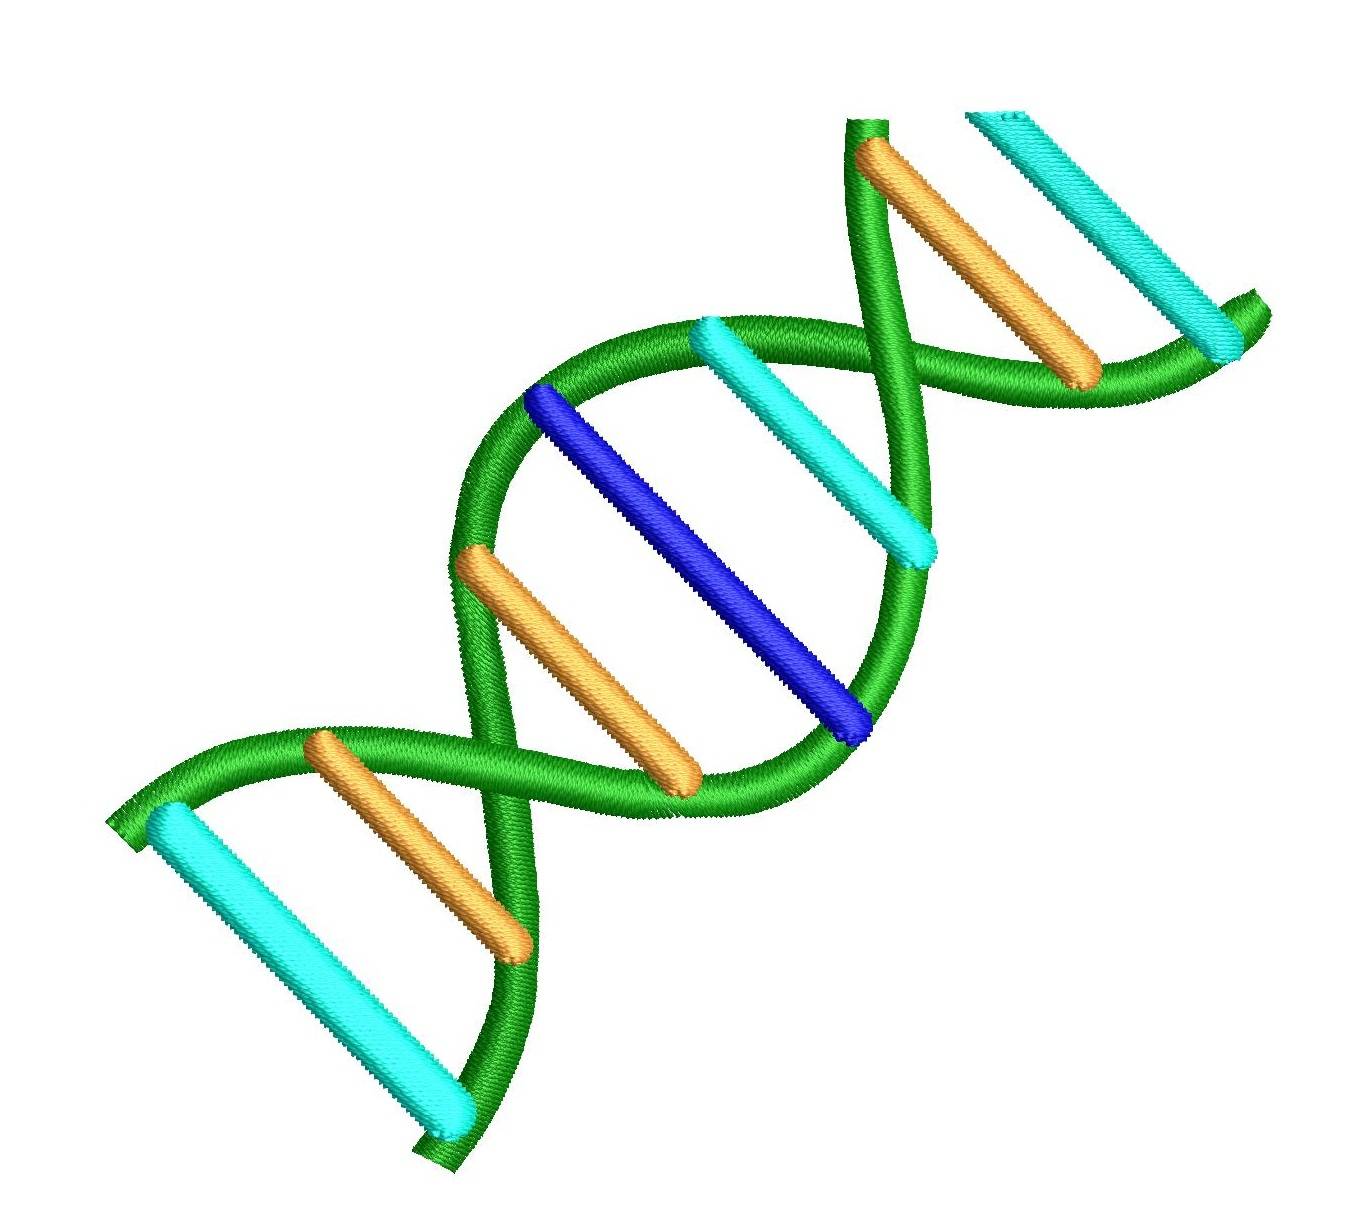 DNA Replication, Repair, and Recombination